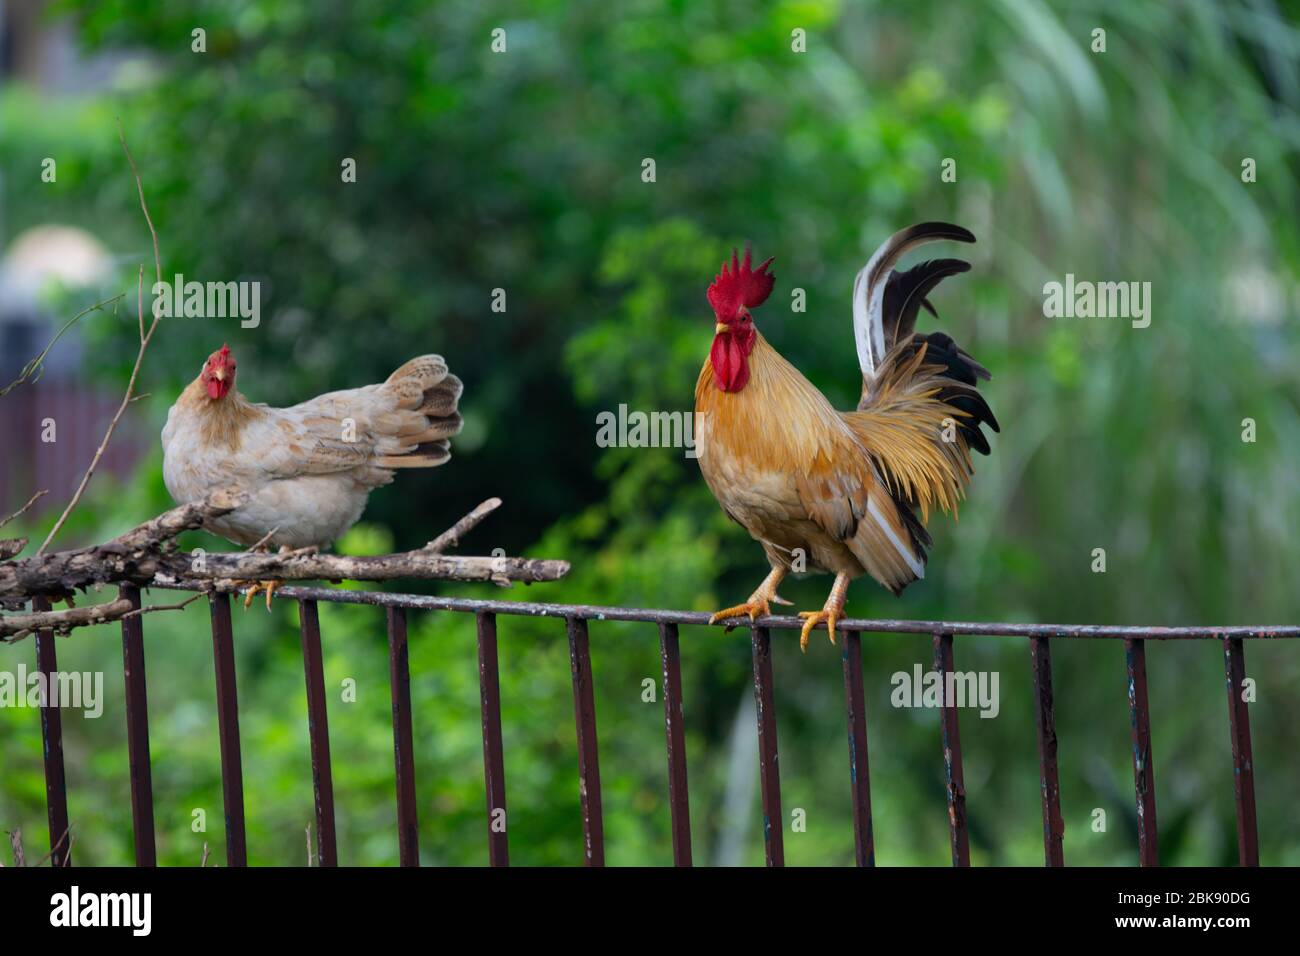 A couple of bantam chickens perches on a fence. Stock Photo